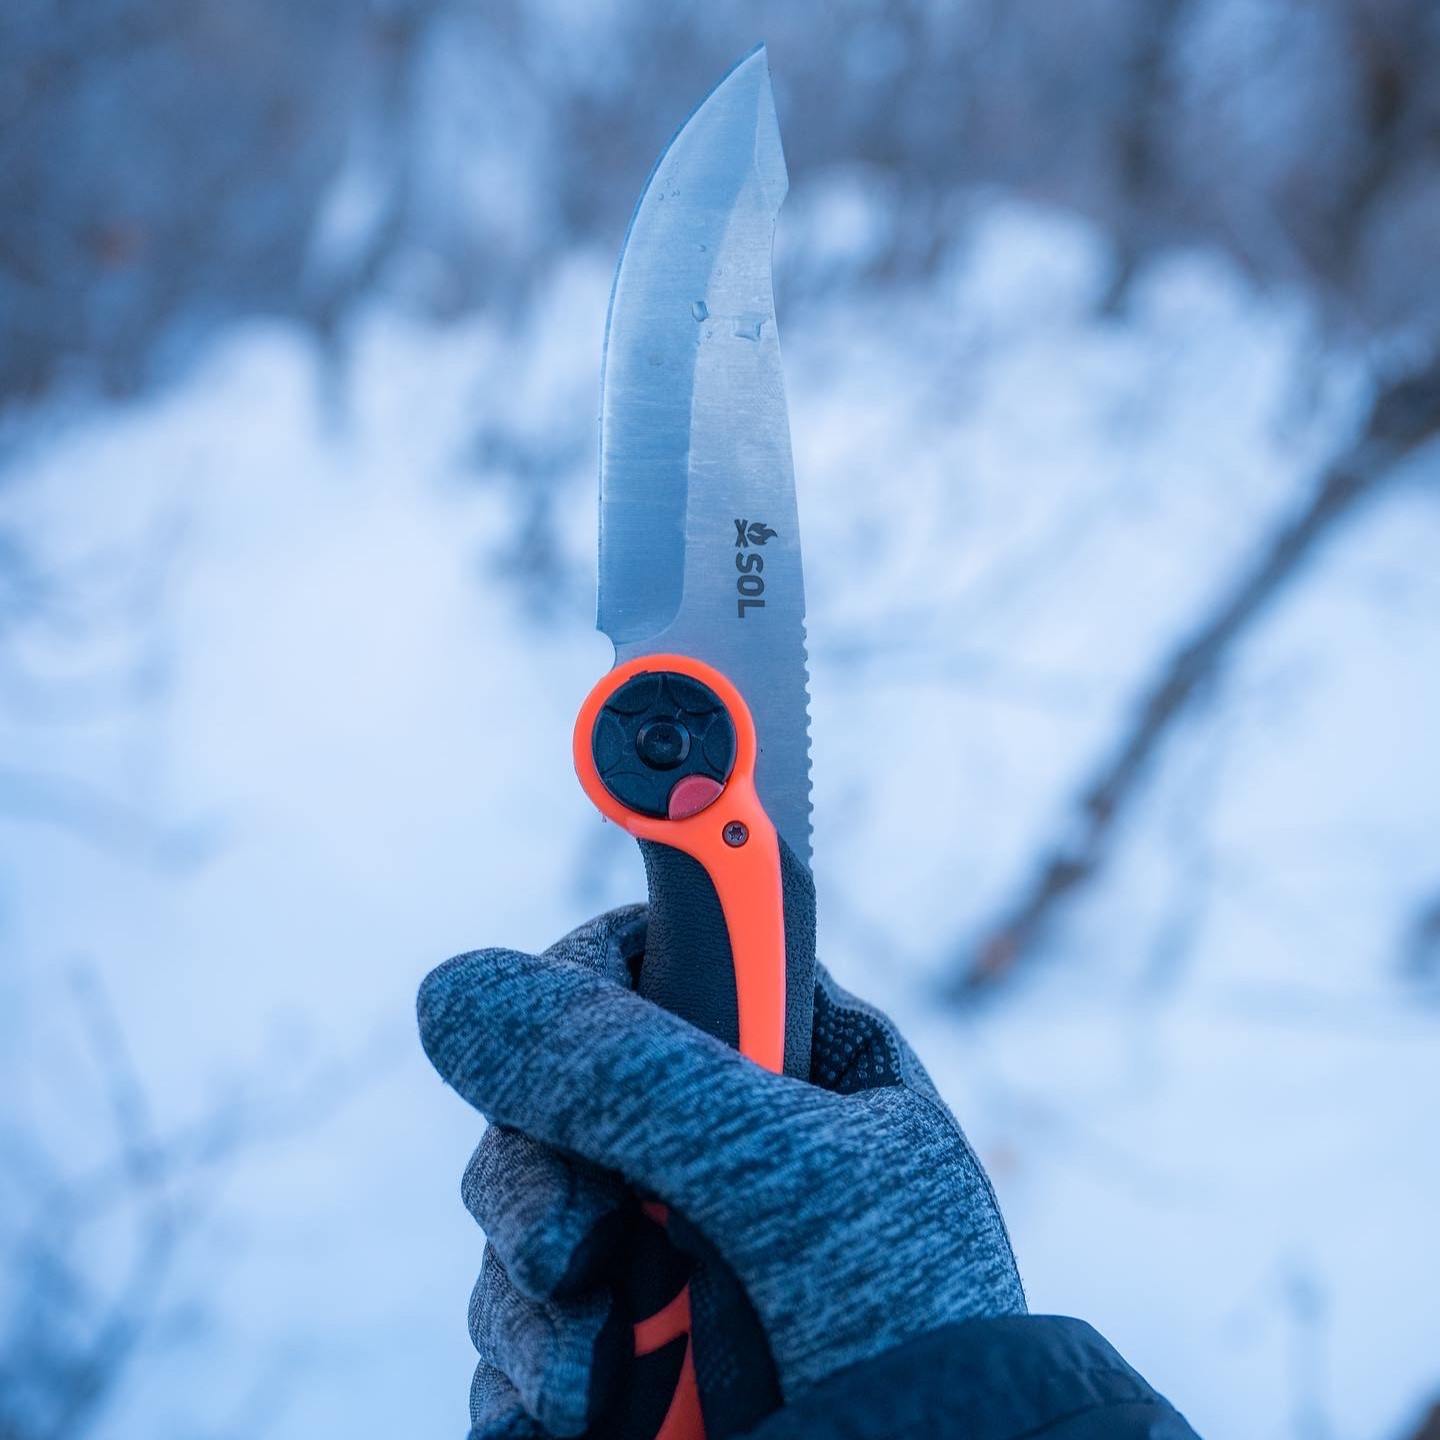 Stoke Pivot Knife & Saw holding opened knife in winter with glove on hand